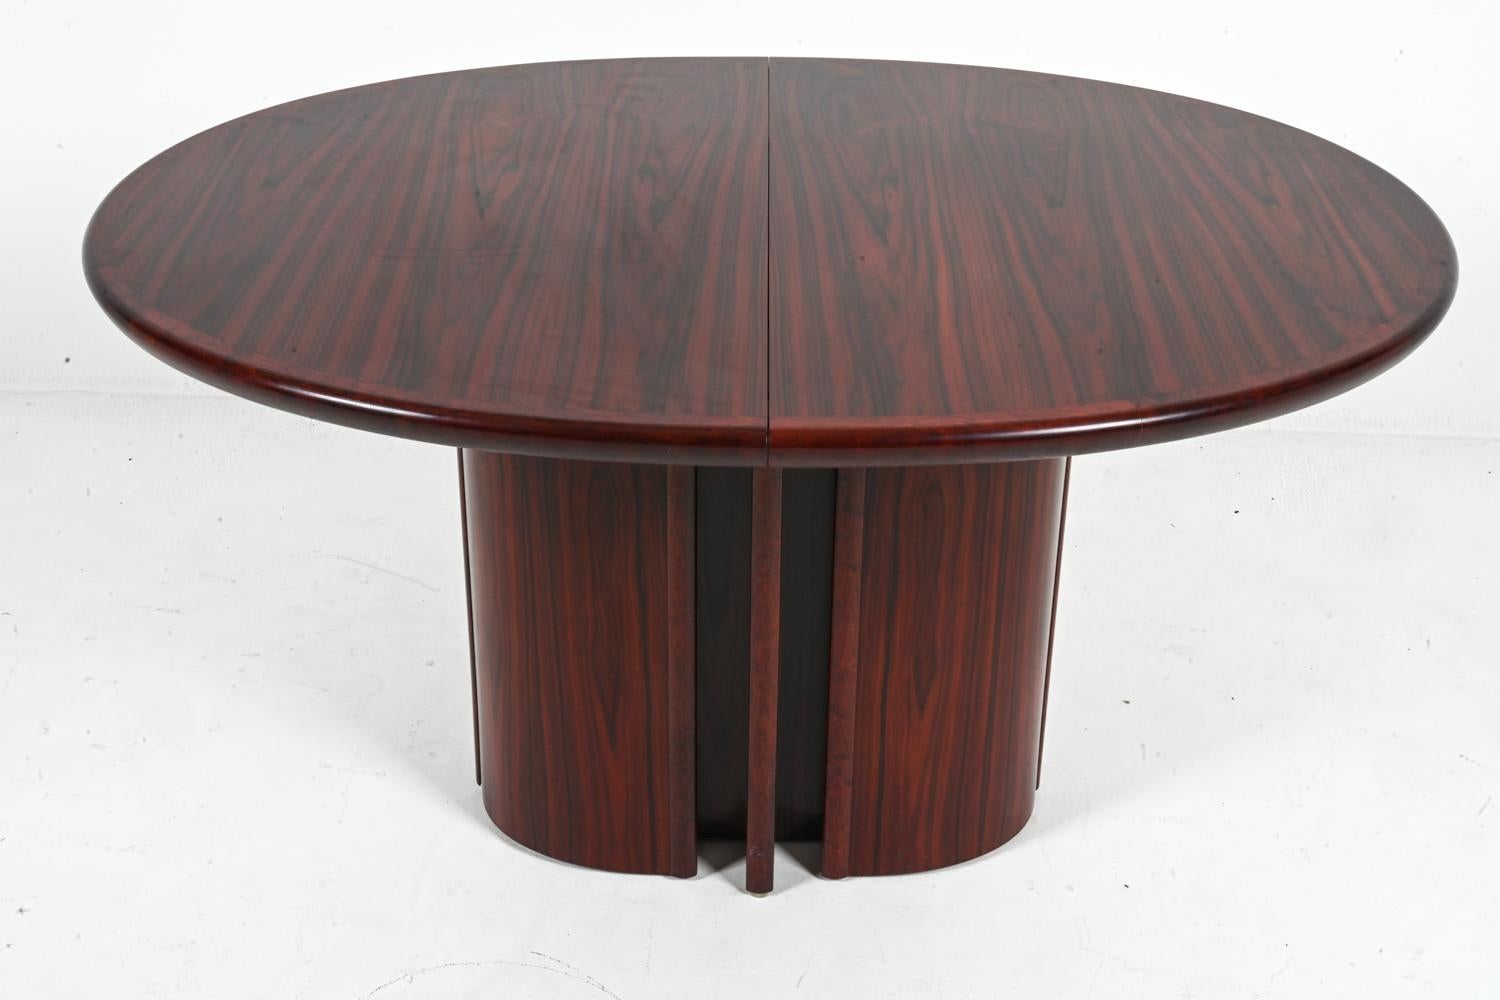 Art Deco-Style Butterfly Leaf Dining Table by Skovby, Denmark 1970's For Sale 8